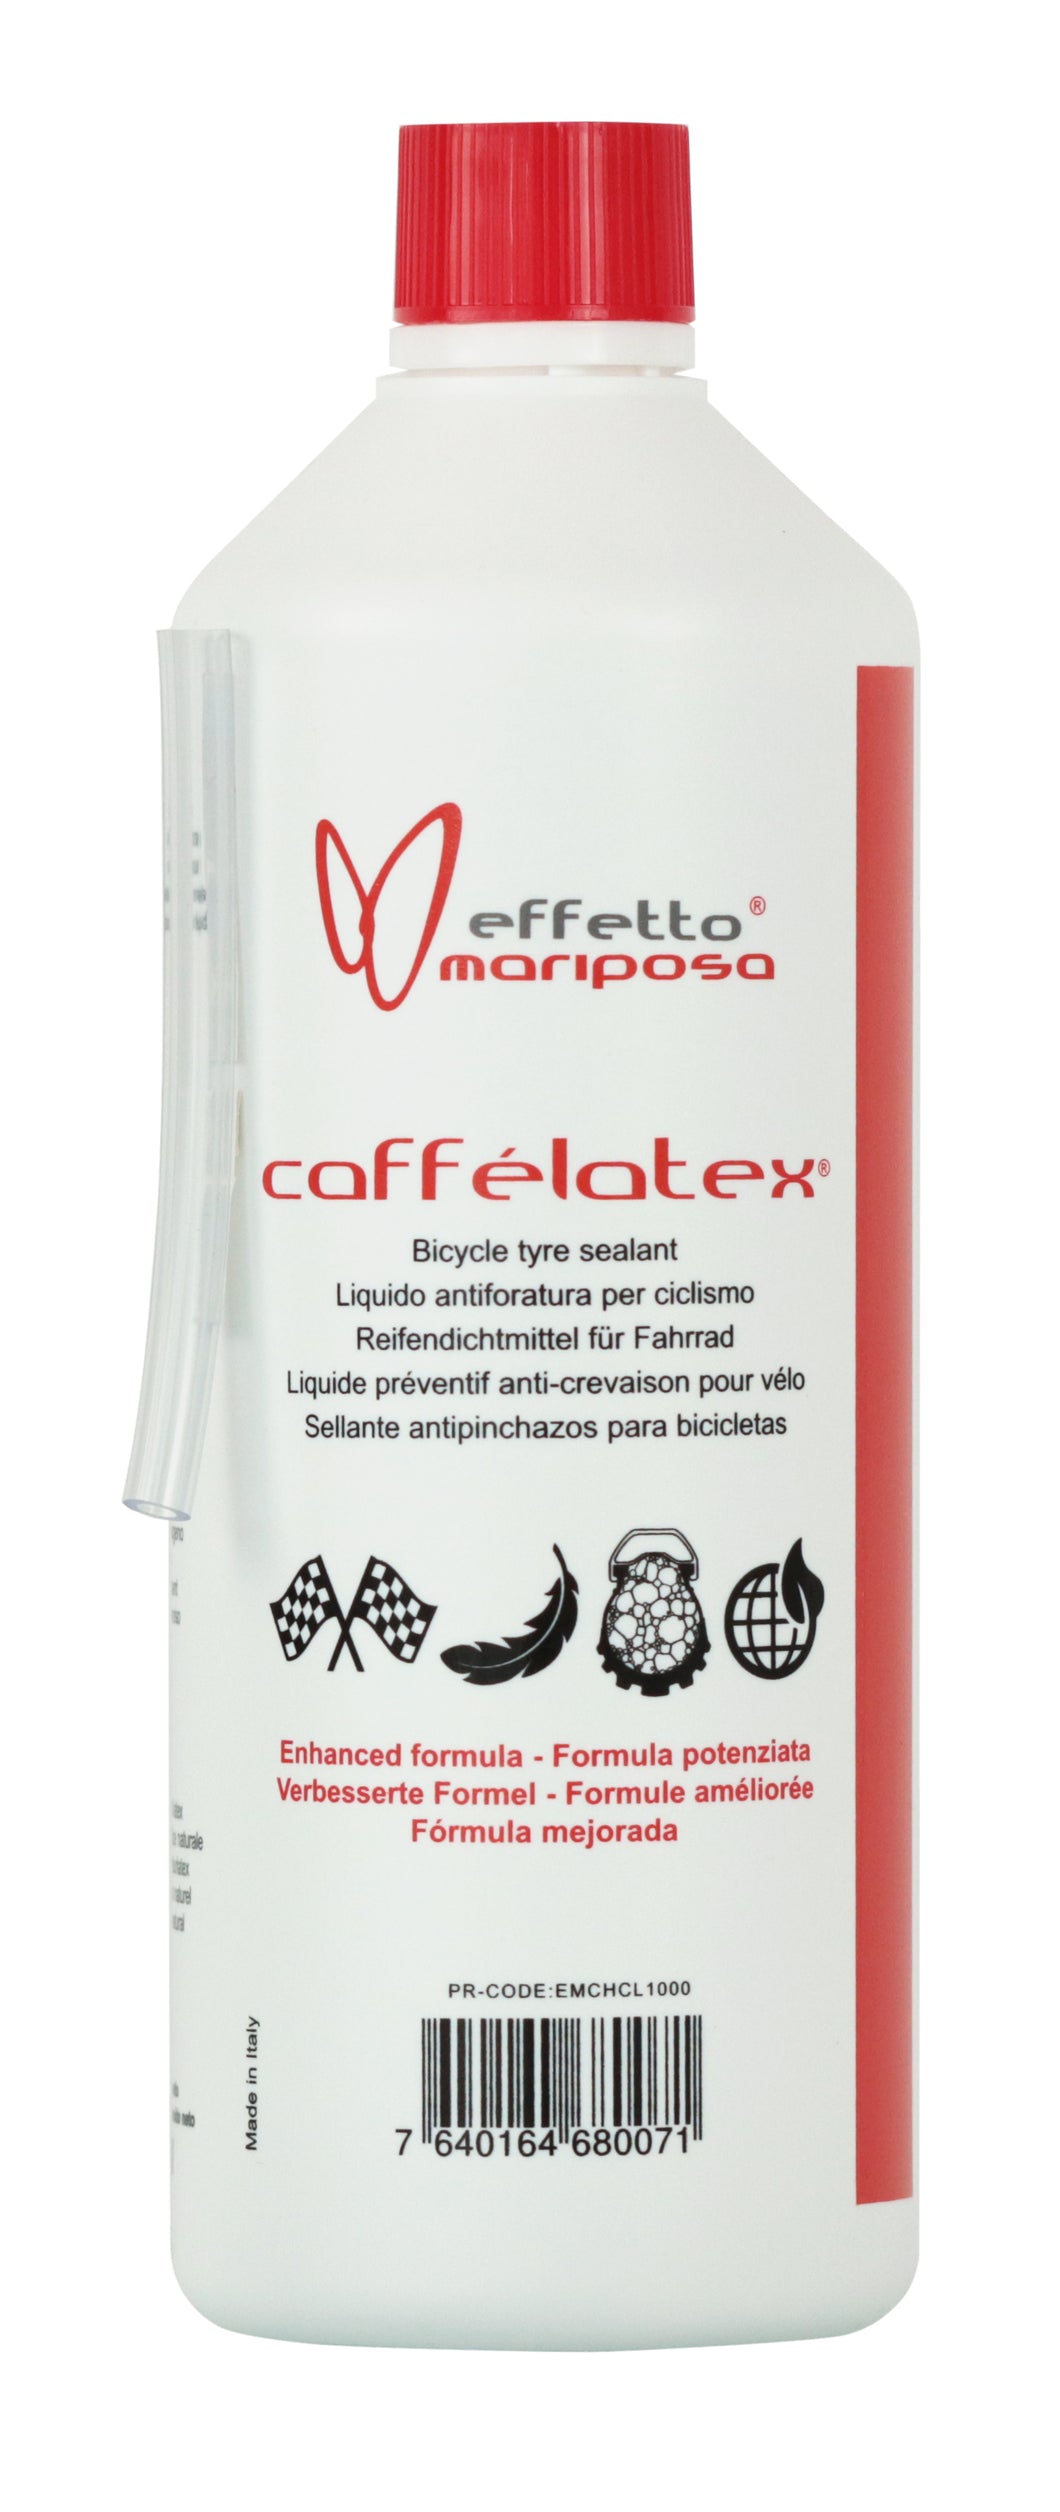 CAFFÉLATEX – BICYCLE TYRE SEALANT